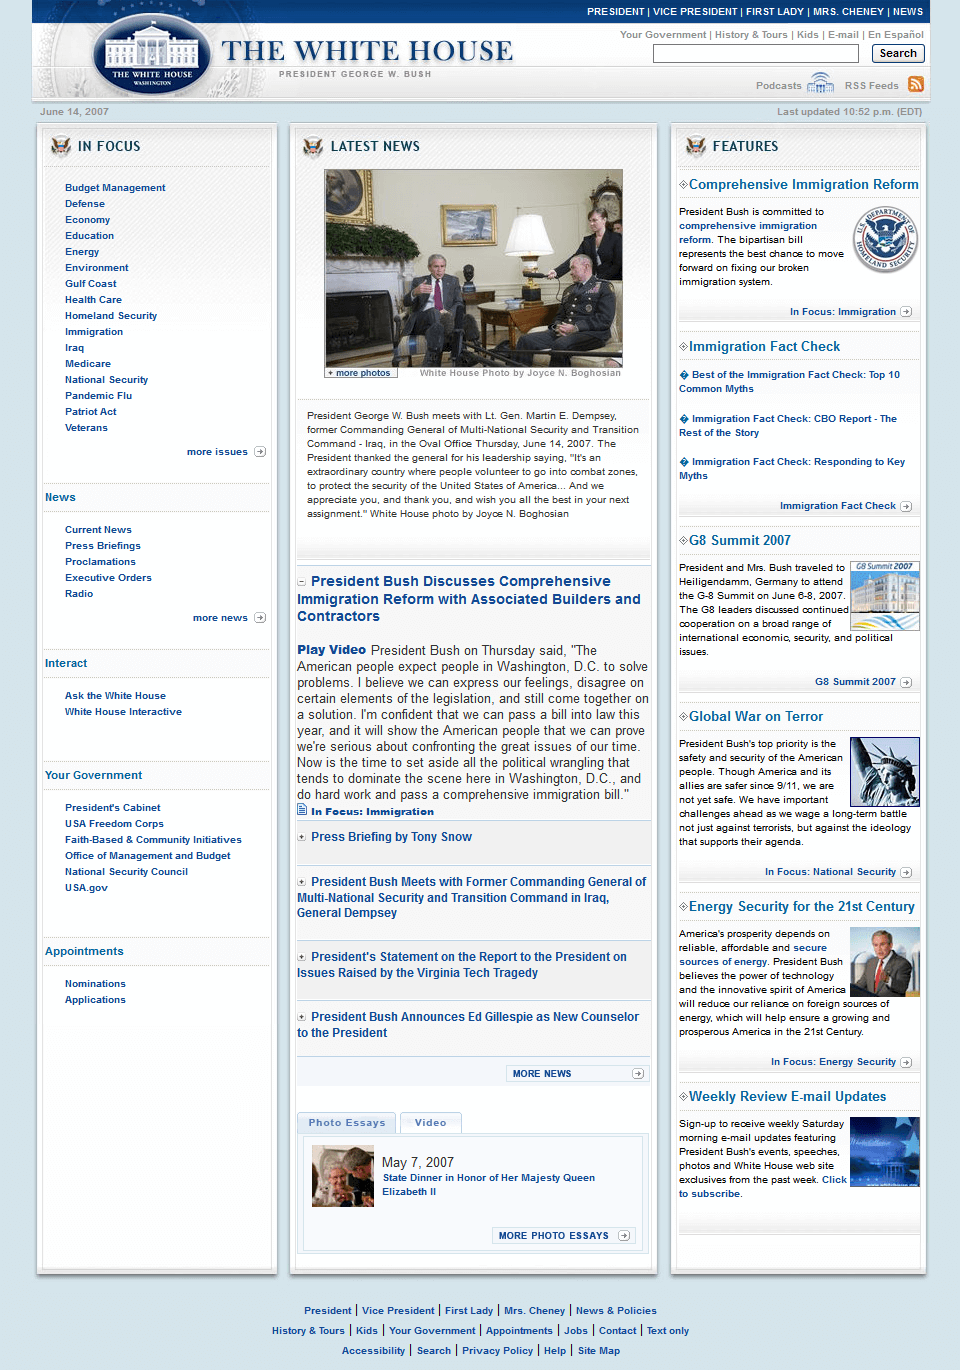 The White House website in 2007